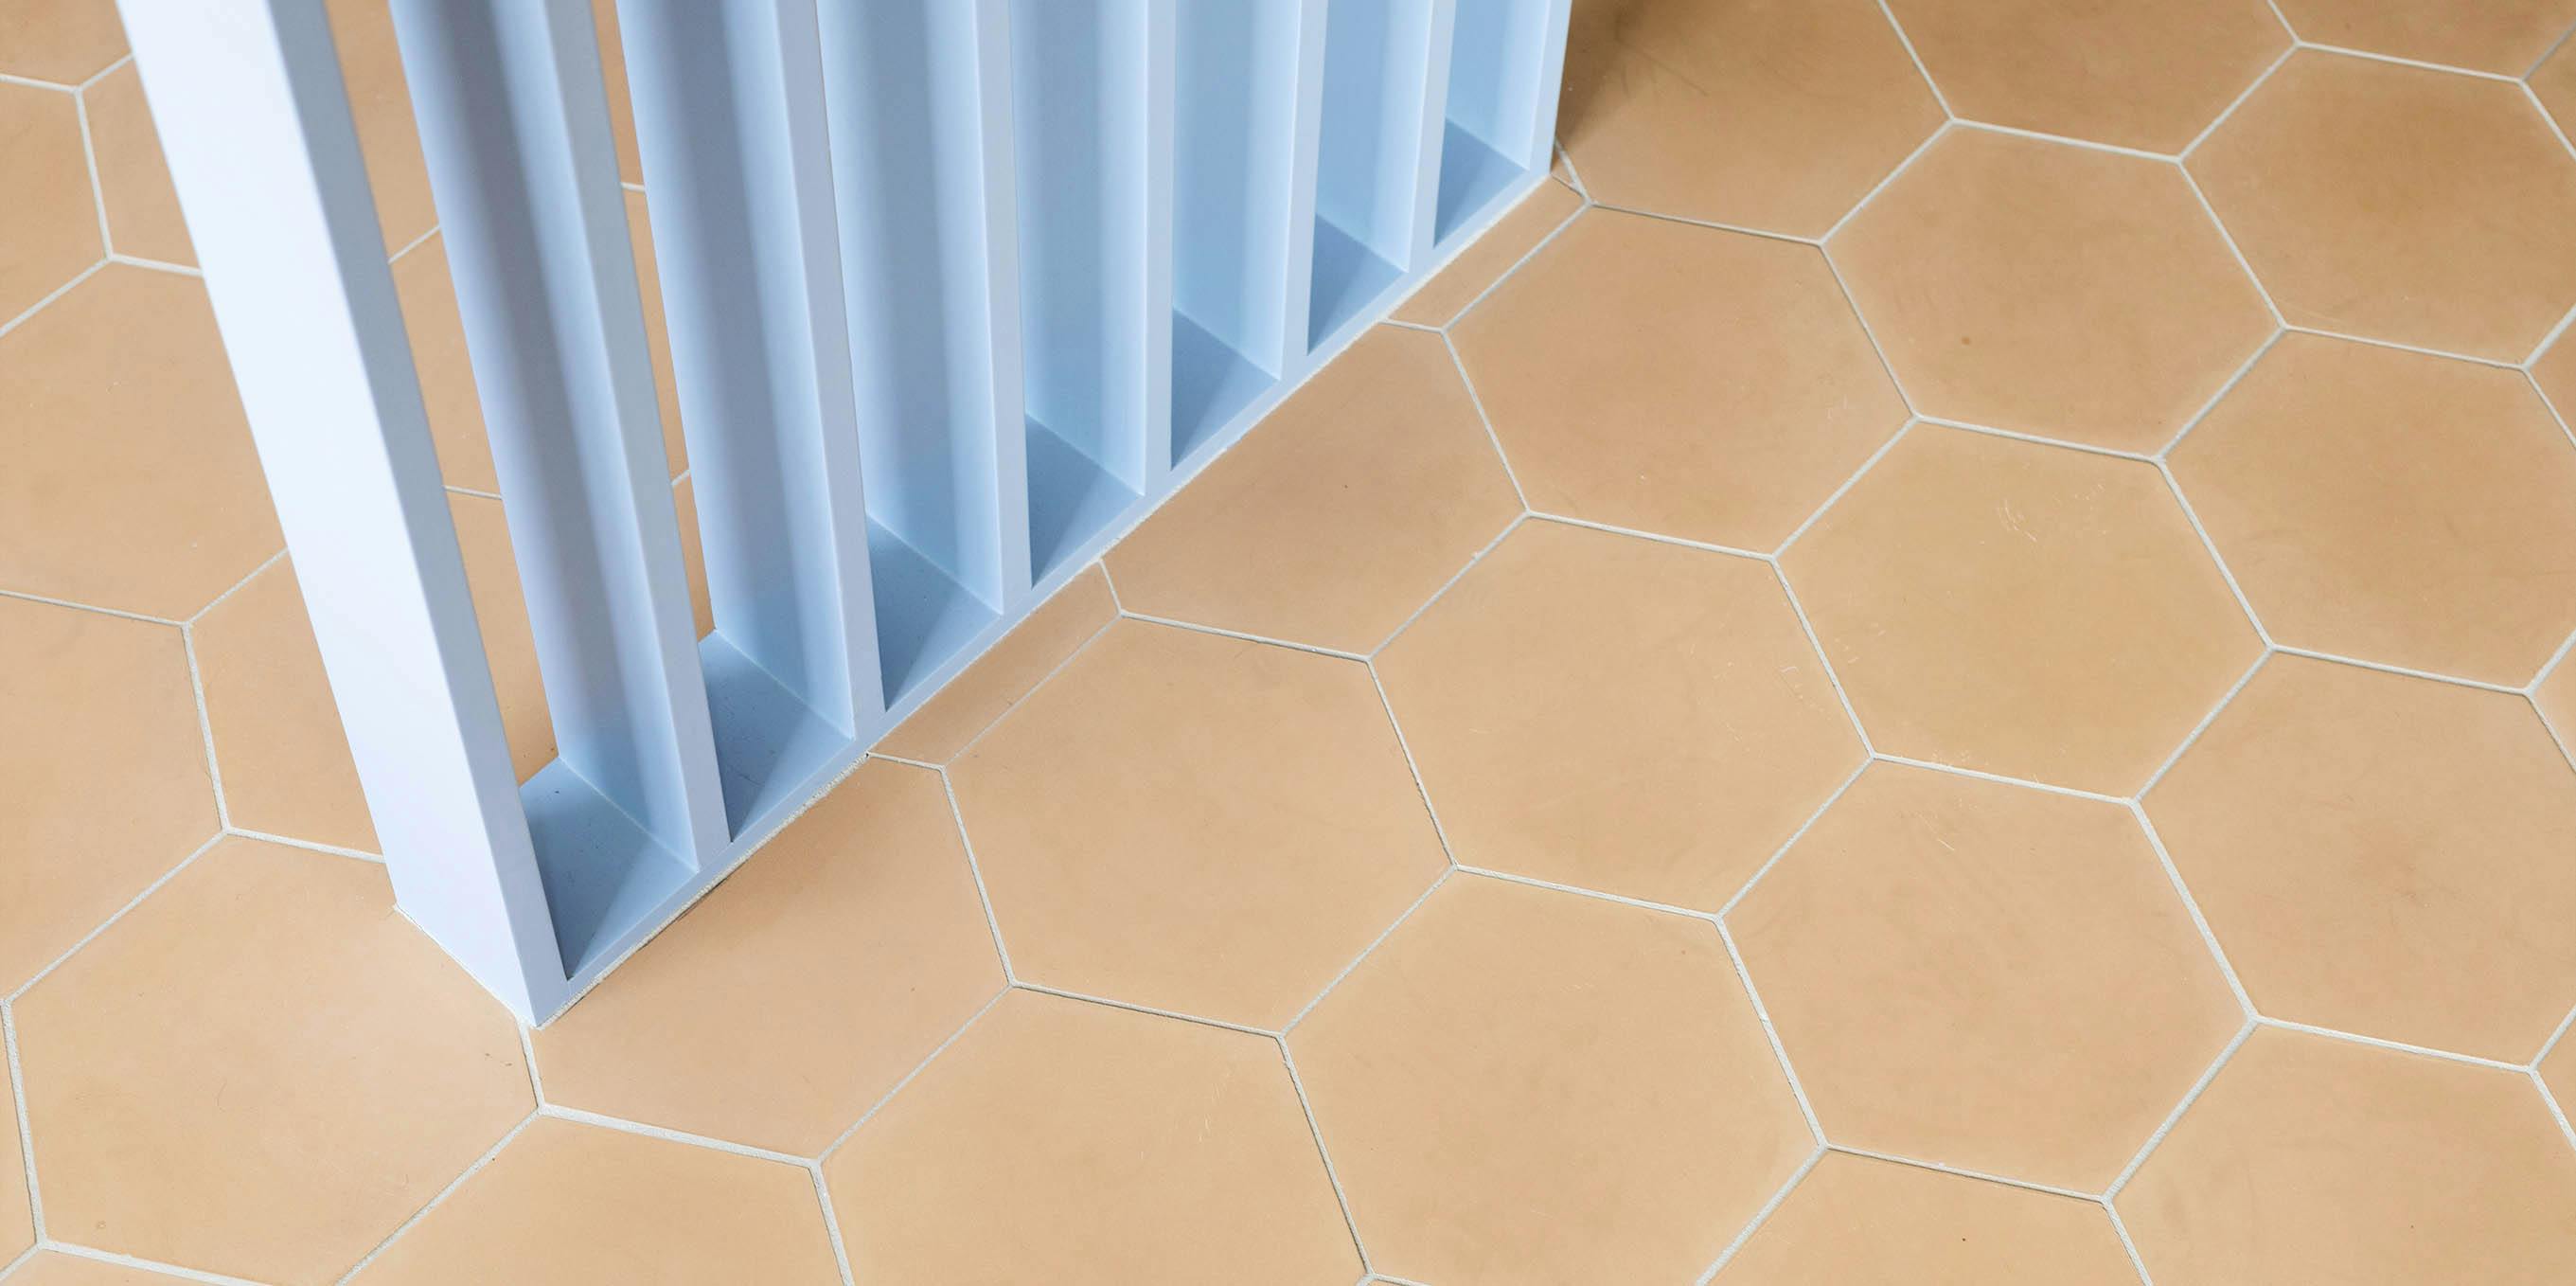 Cement Tile: Hex Solid collection featured image.